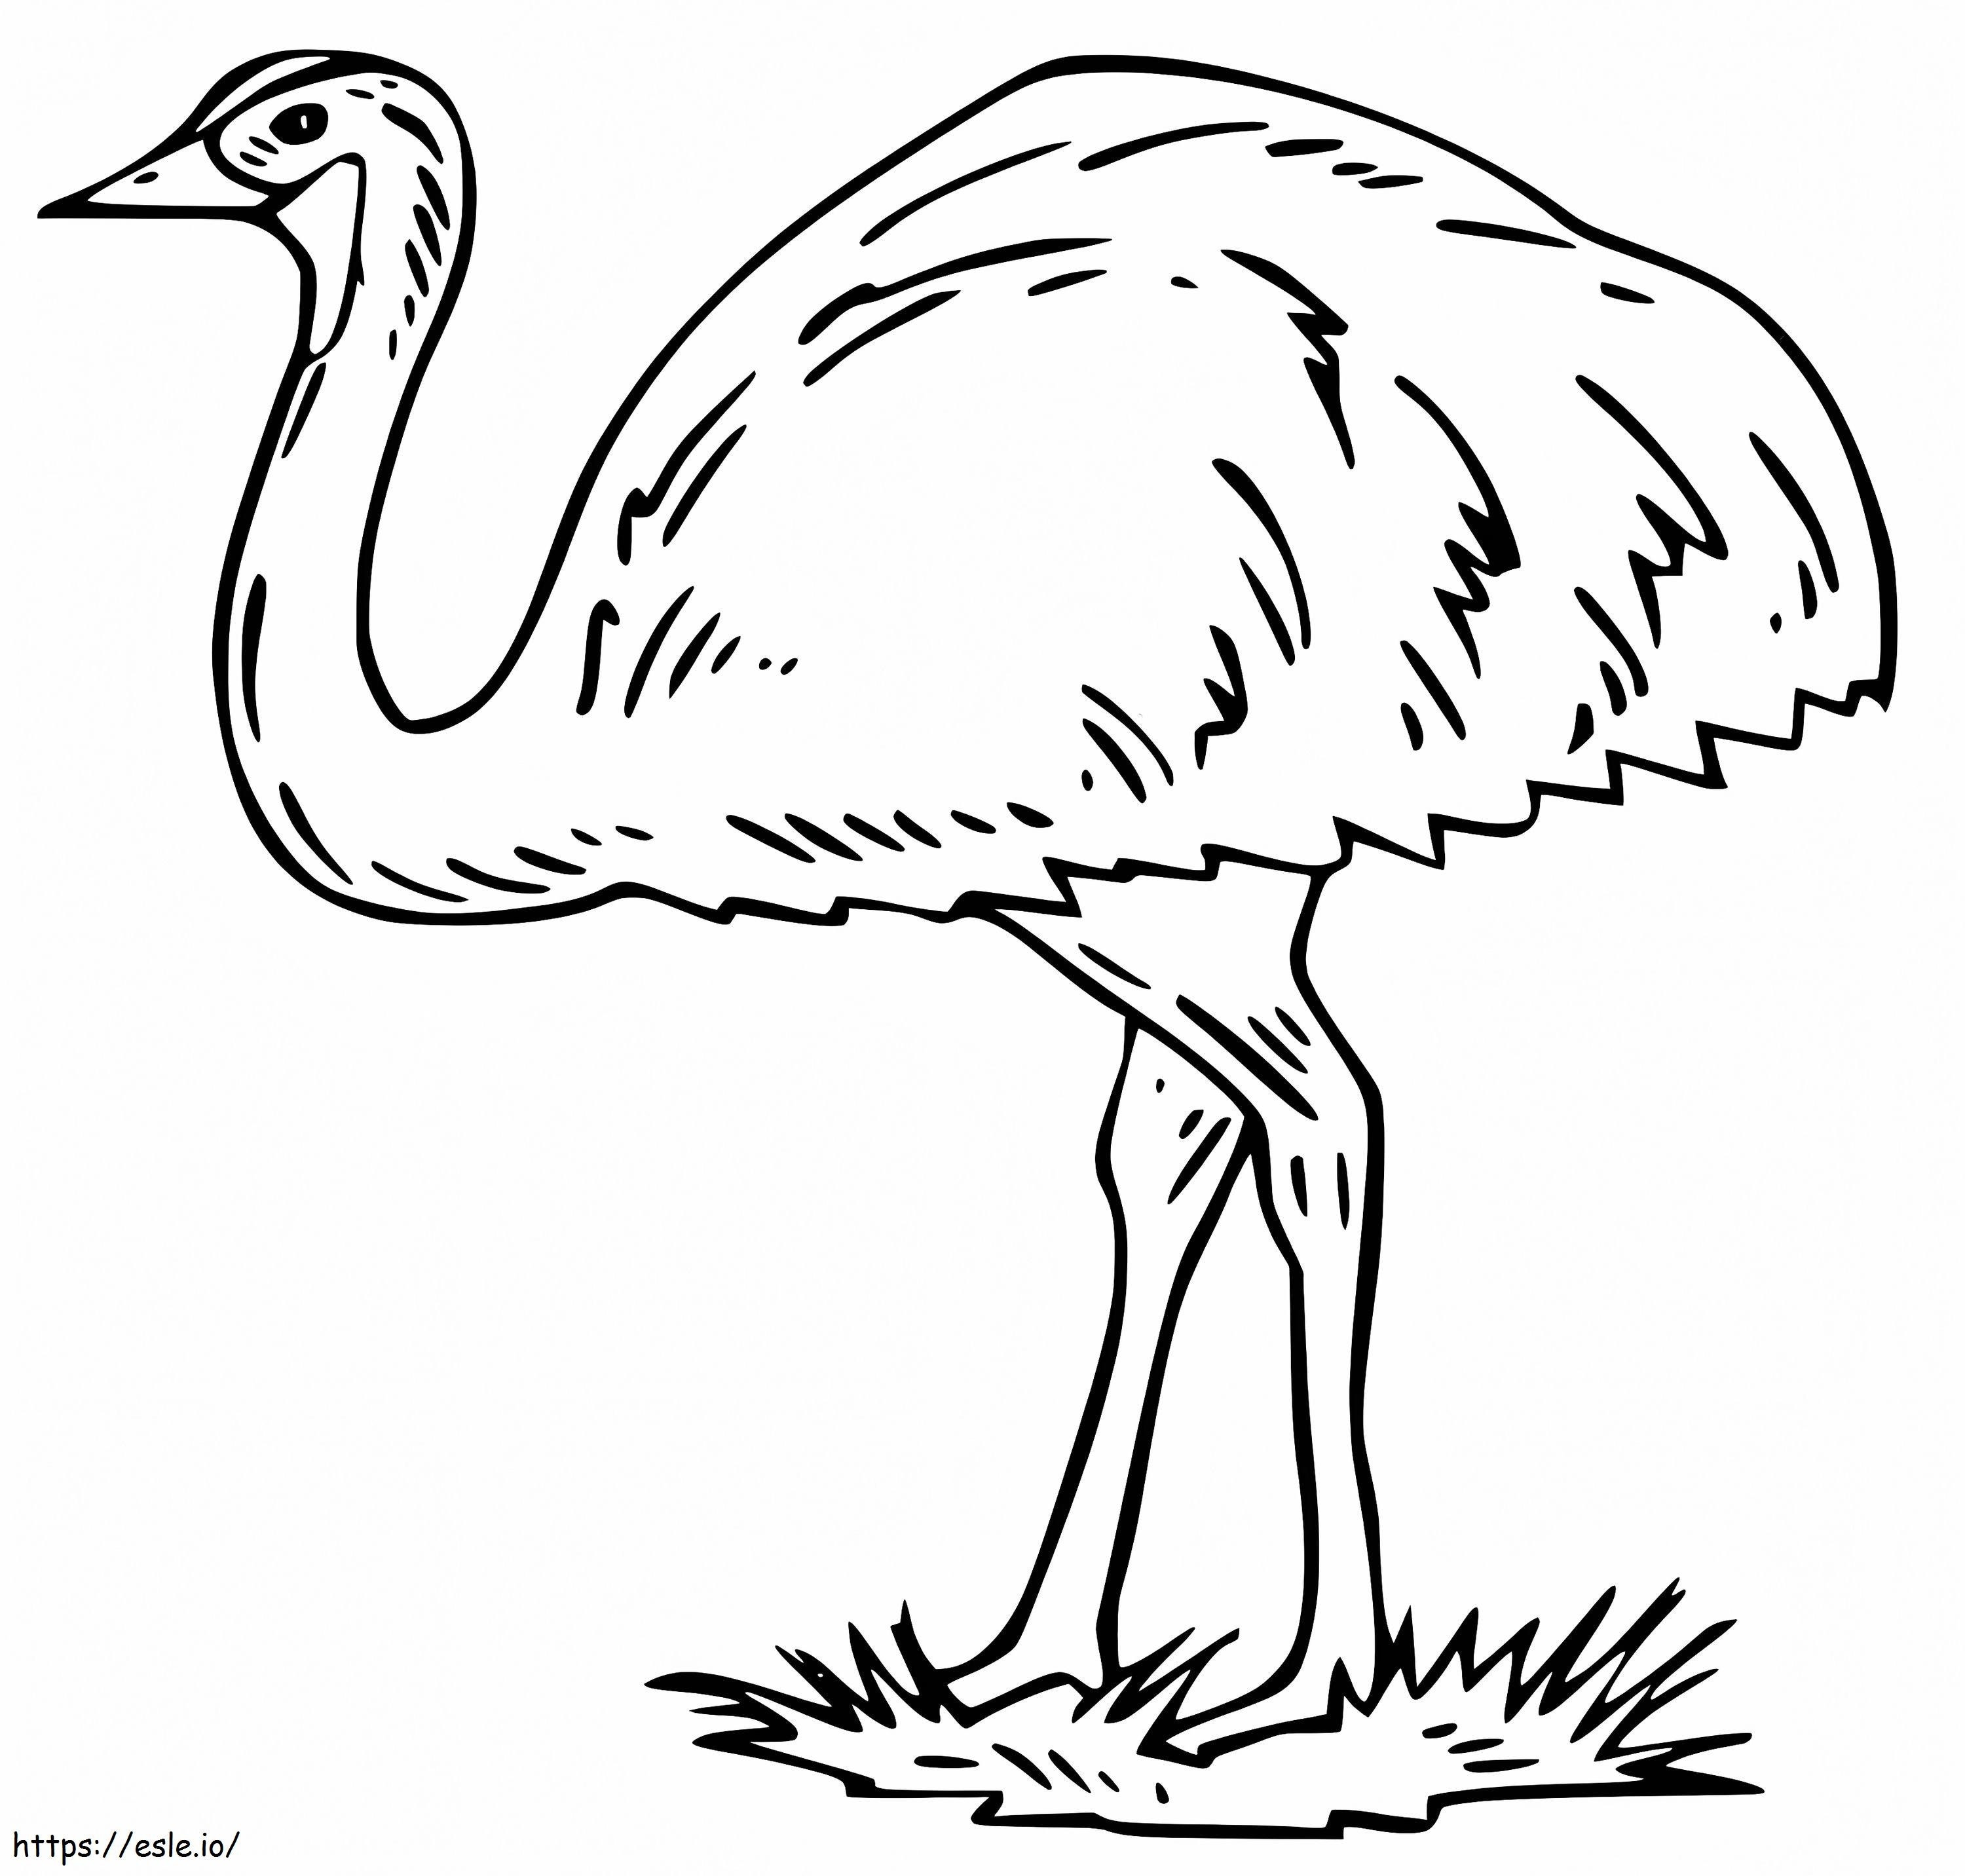 Emu 1 coloring page